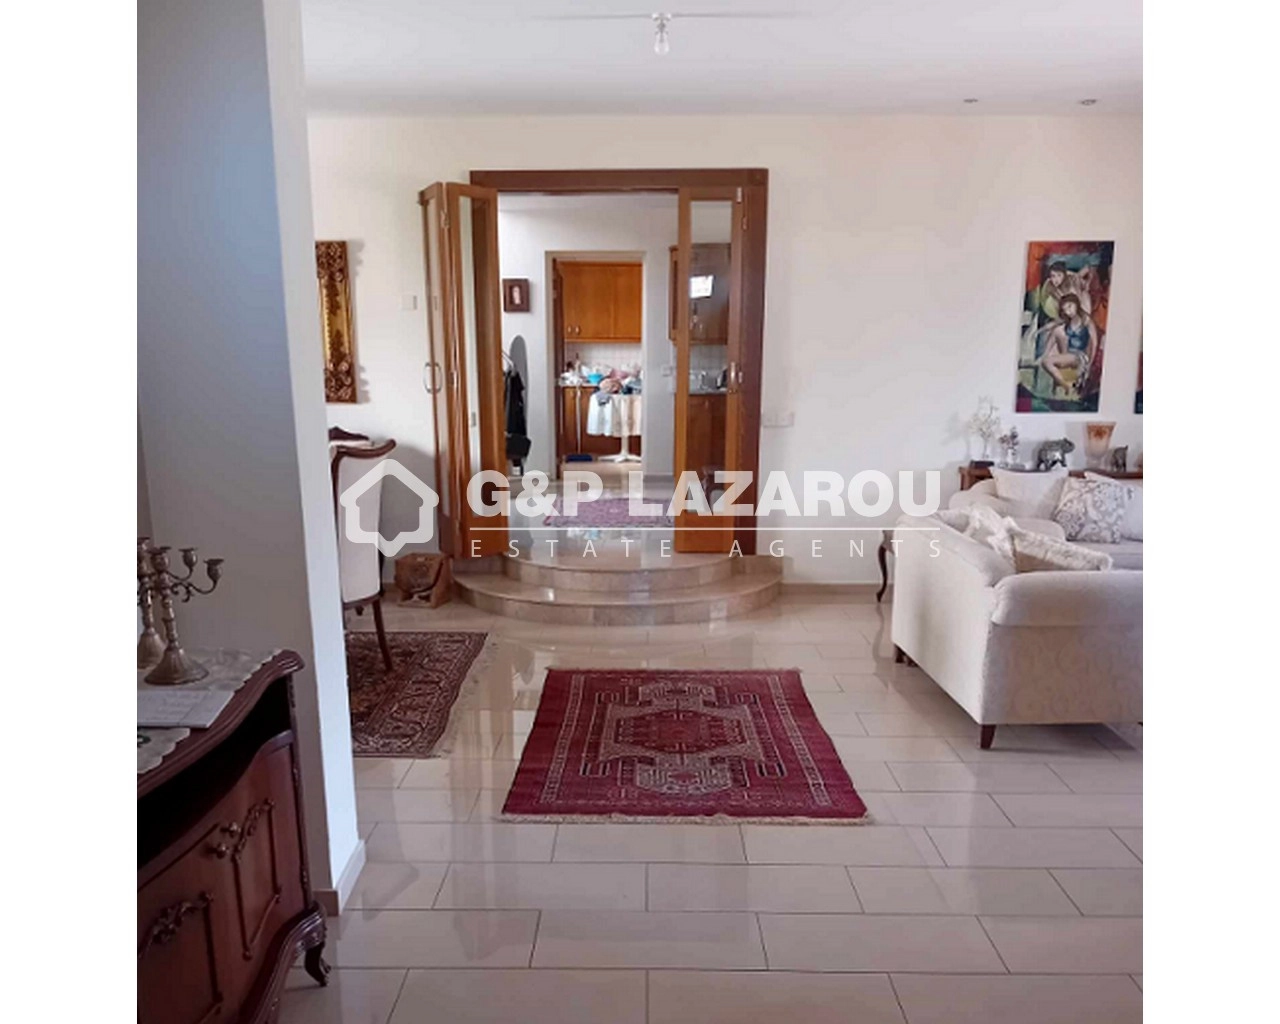 5 Bedroom House for Sale in Konia, Paphos District